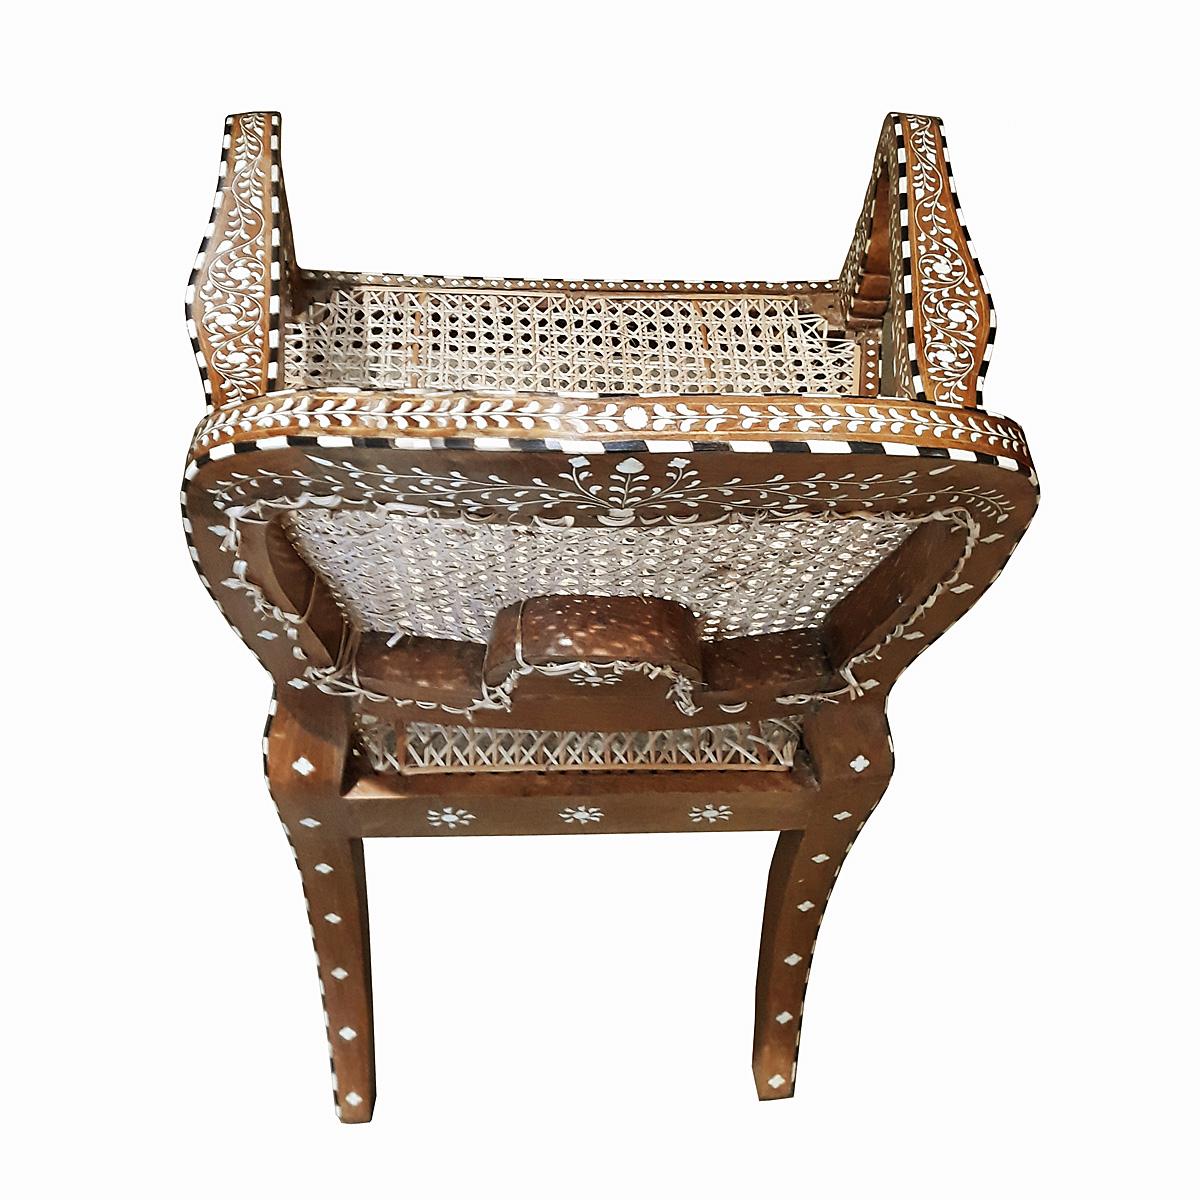 Contemporary Bone-Inlaid Armchair from India